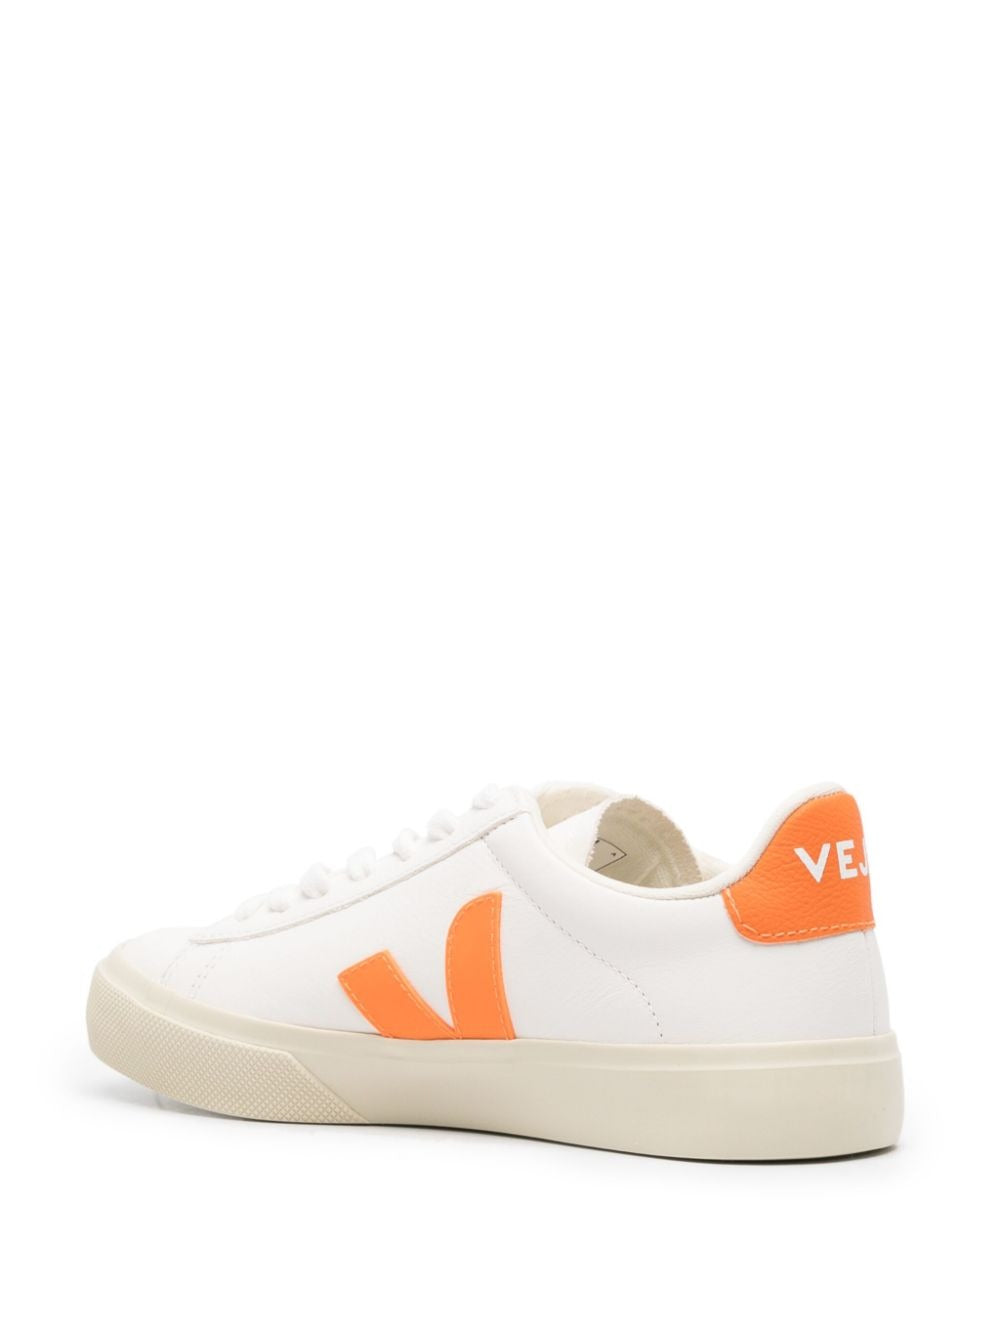 Veja Campo Chromefree Leather Sneaker in Extra-White/Fury